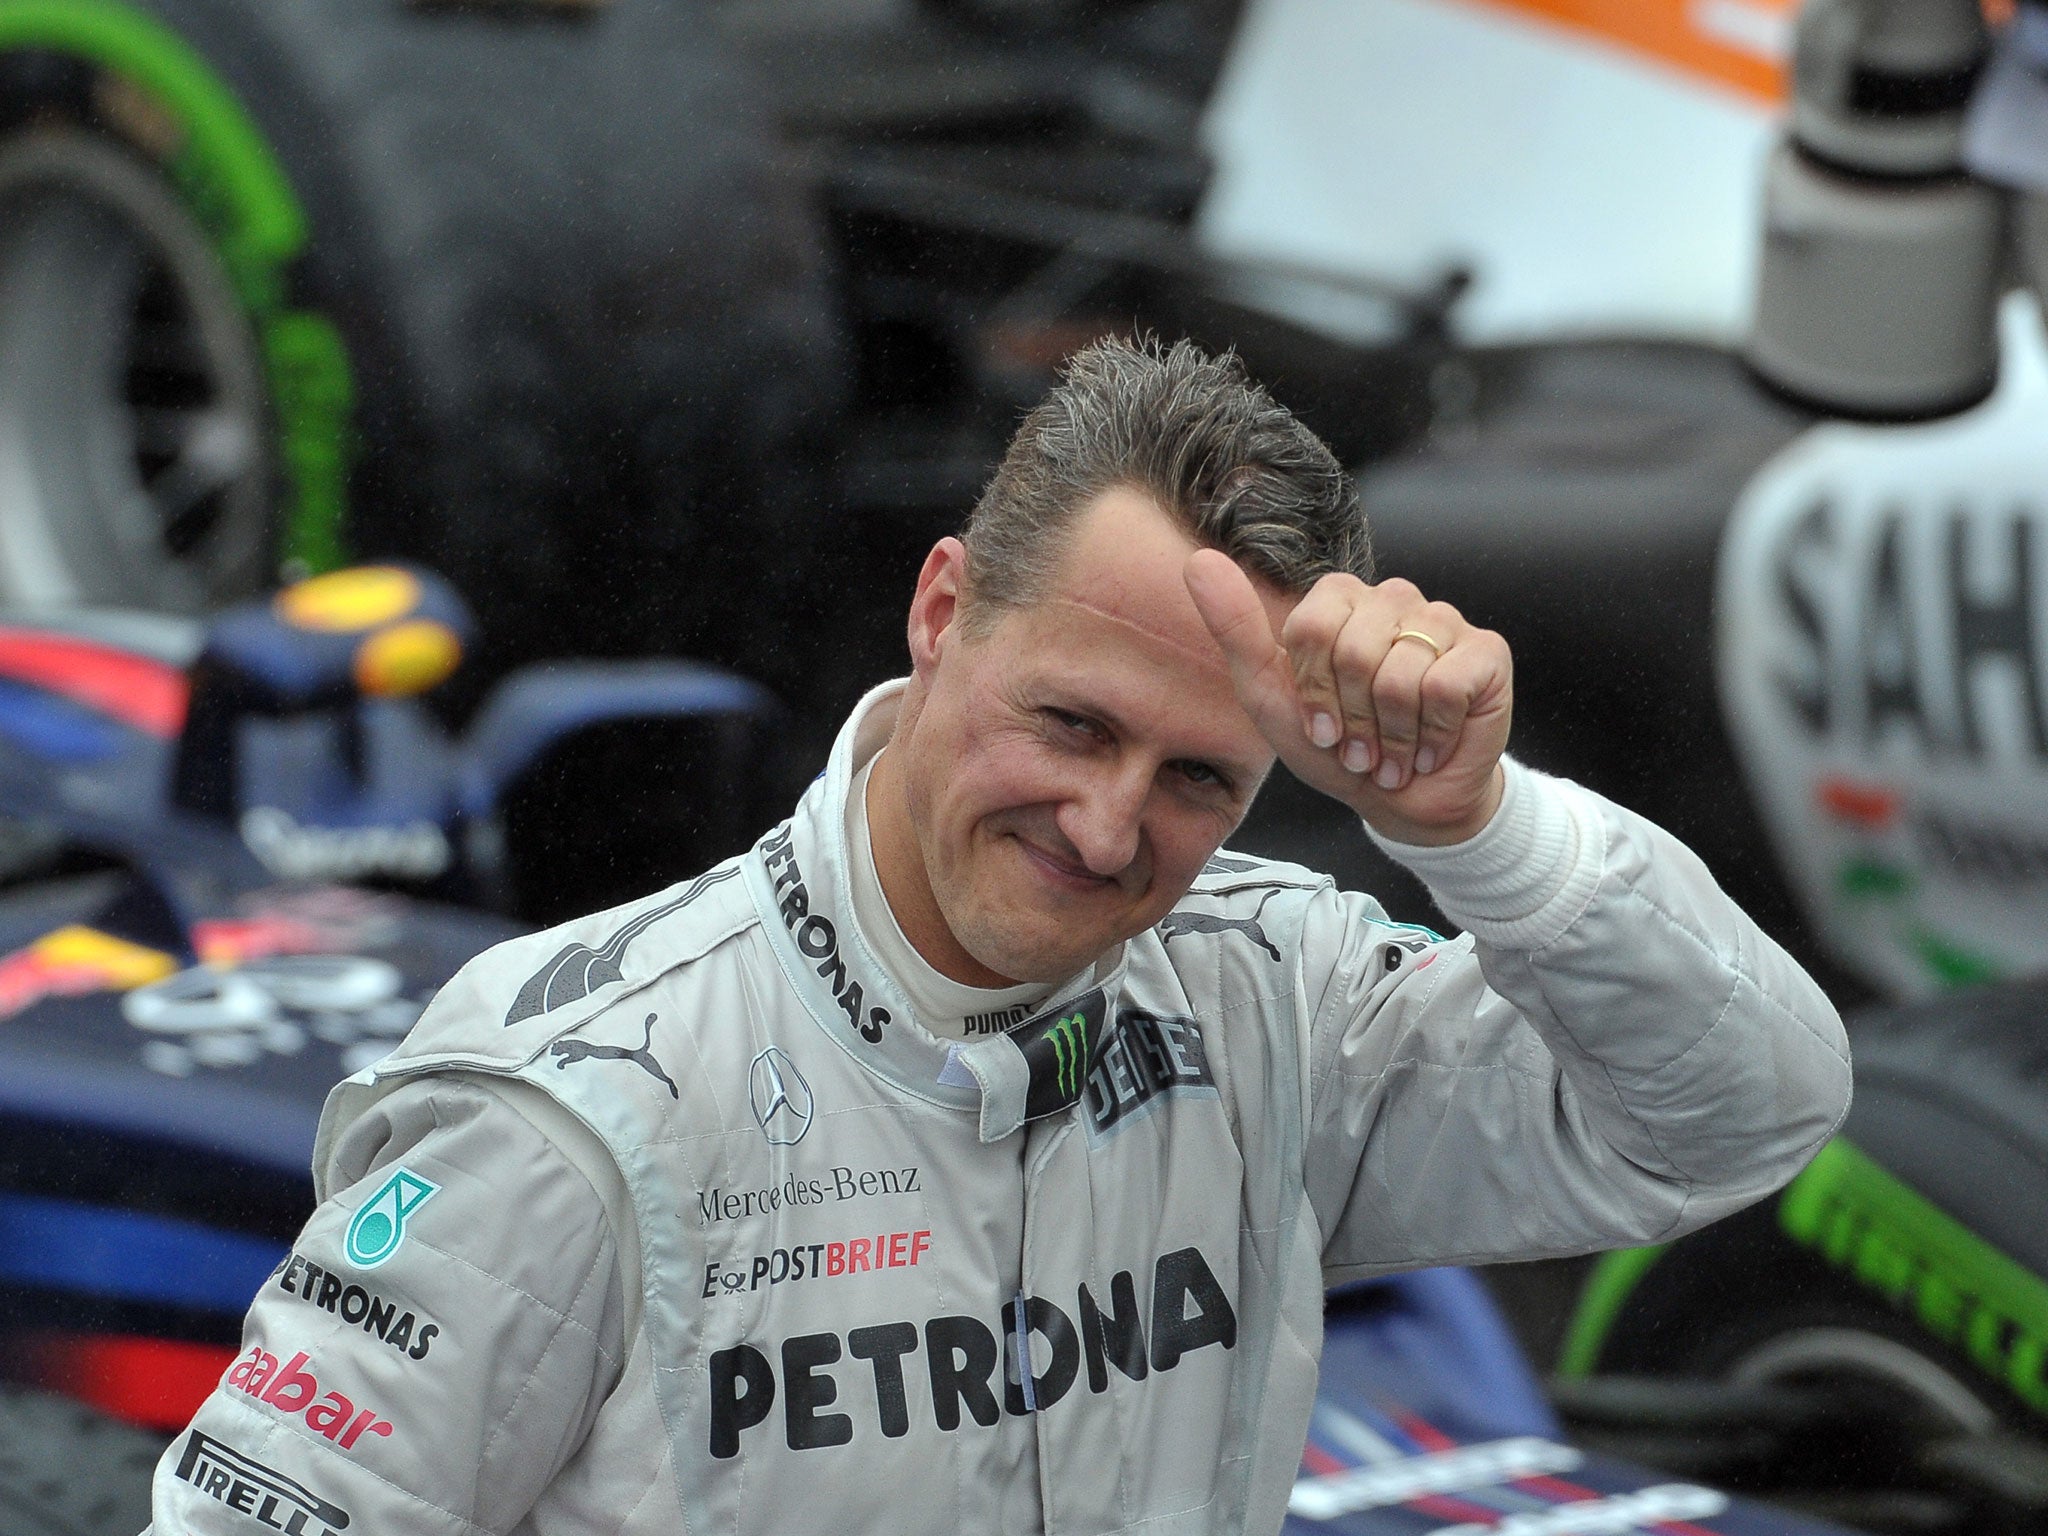 Michael Schumacher's manager Sabine Kehm has said doctors are continuing with the waking-up process